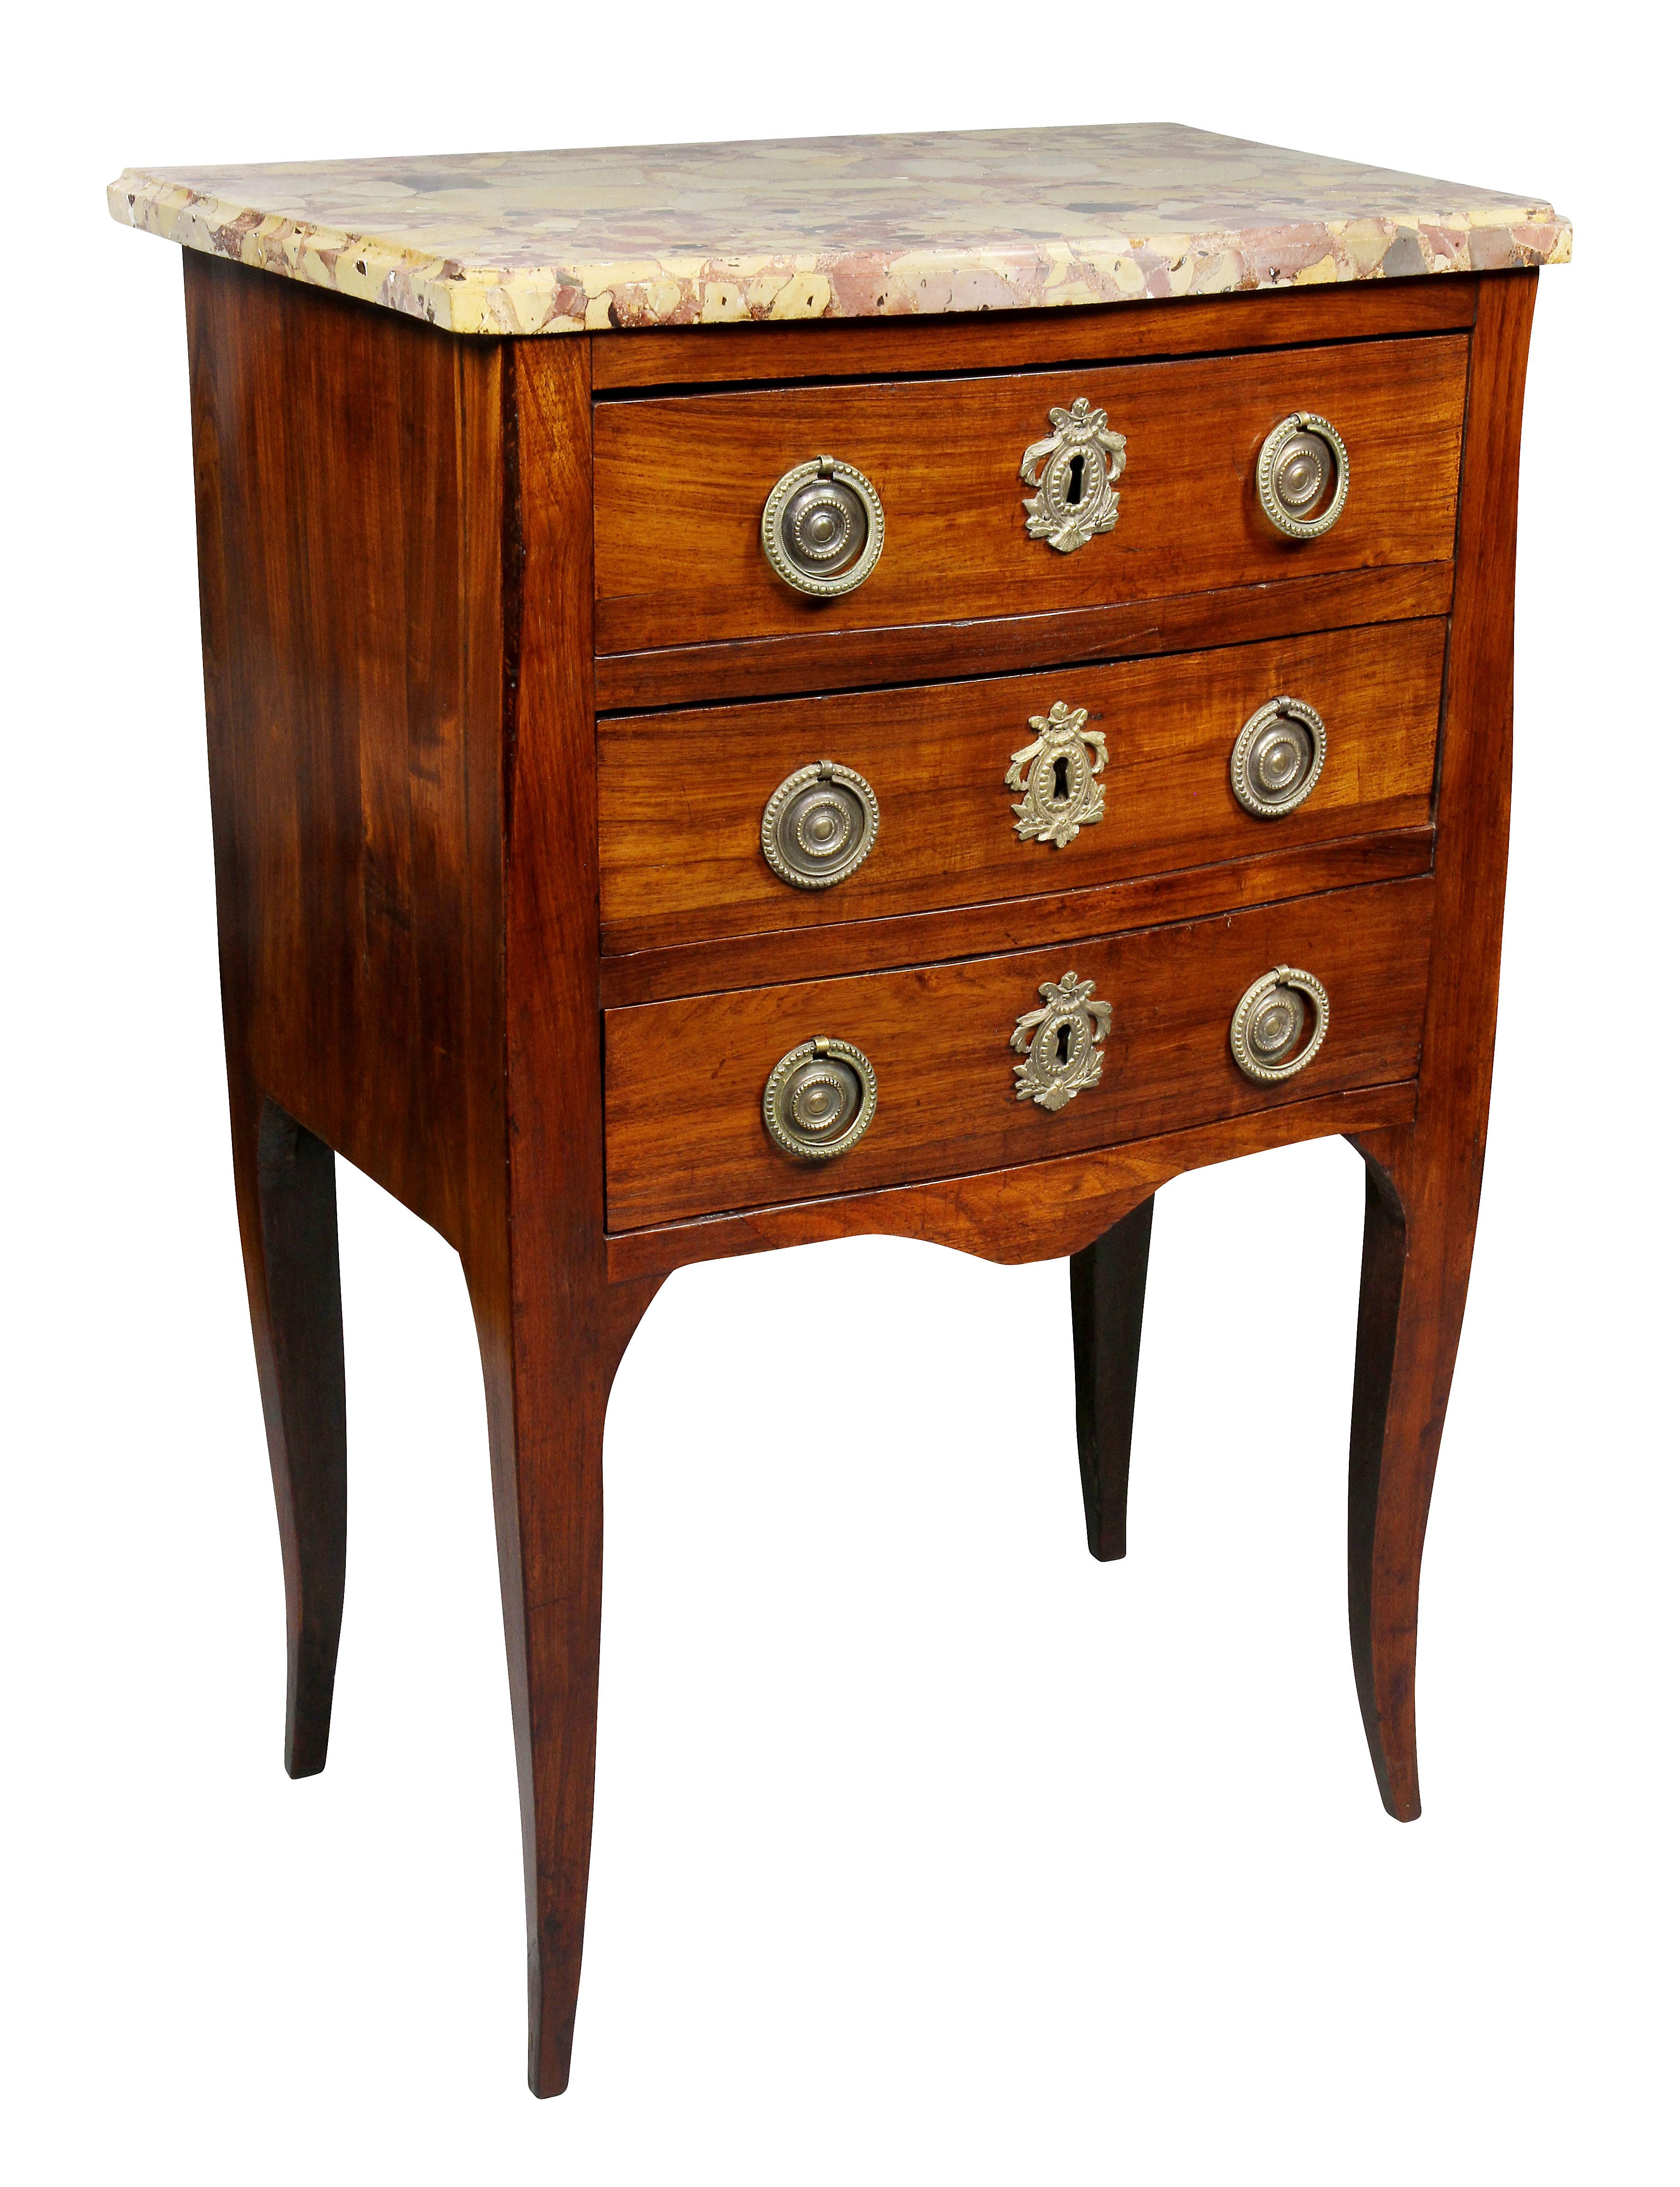 With original Breche De Alep serpentine marble top over three drawers with ring handles and conforming backplates raised on slight cabriole legs.